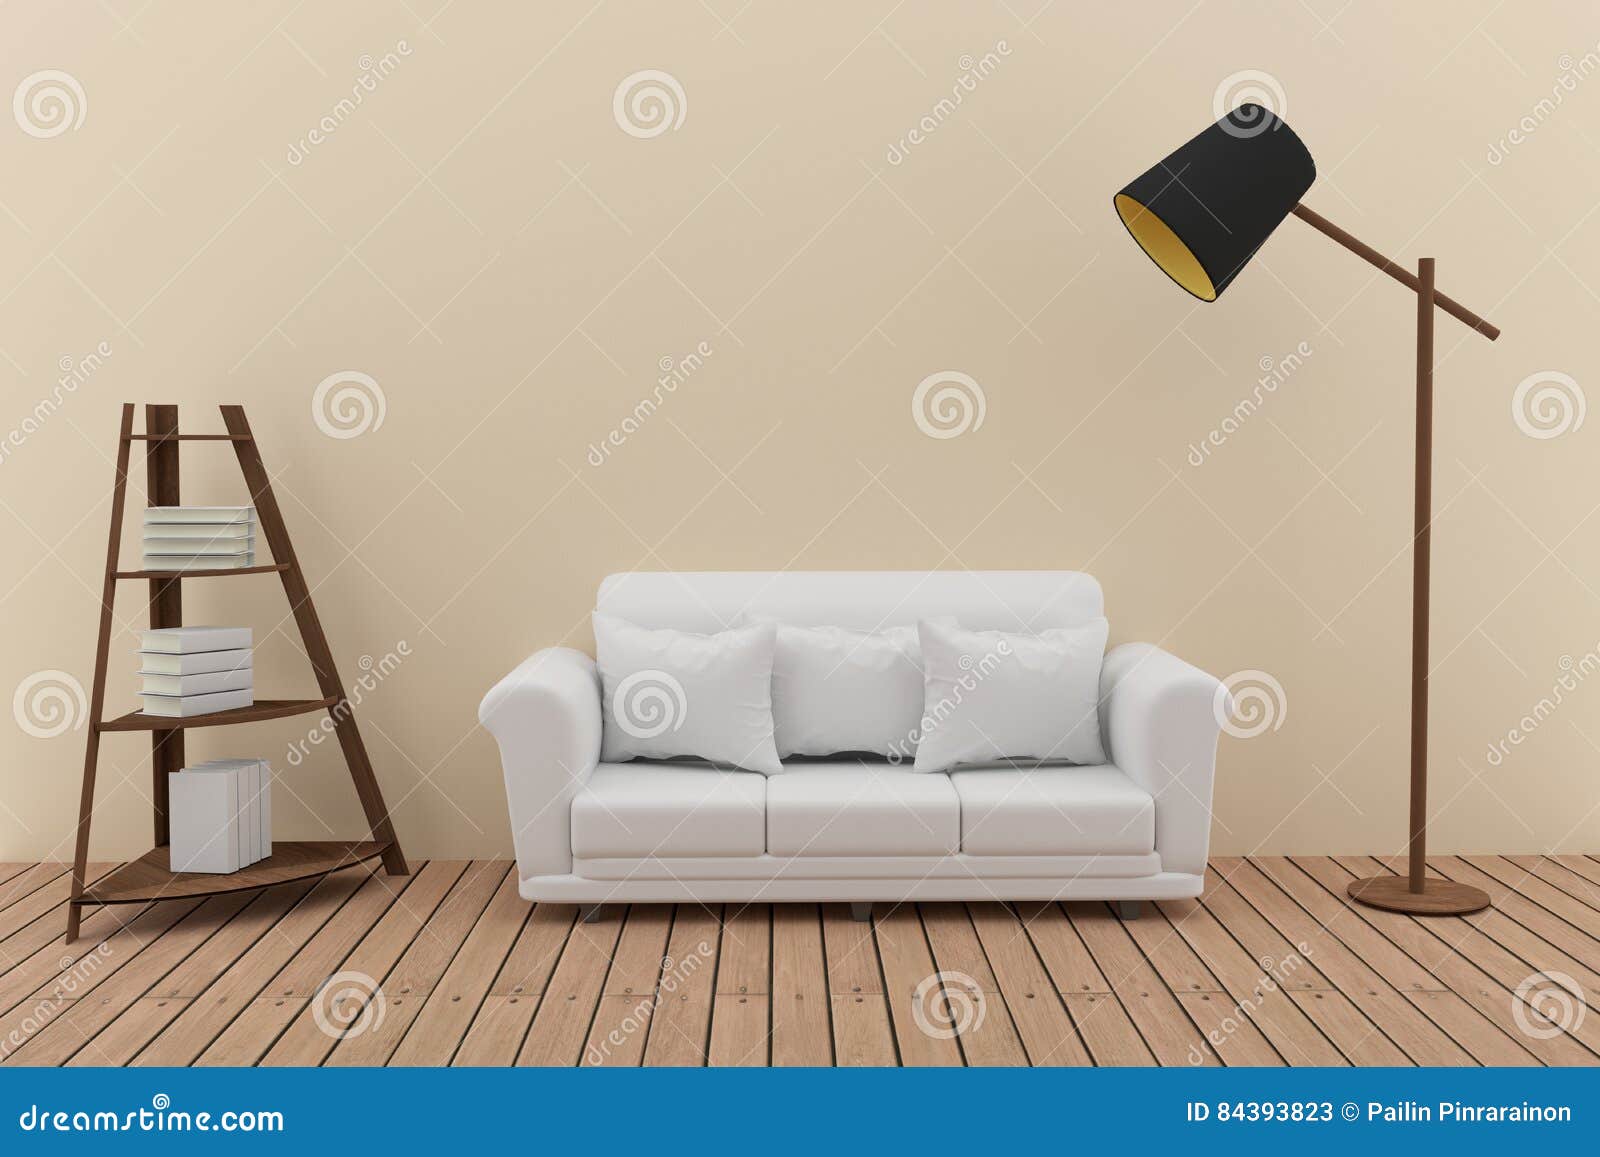 White Sofa Decorate With Bookshelf And Lamp In The Green Room